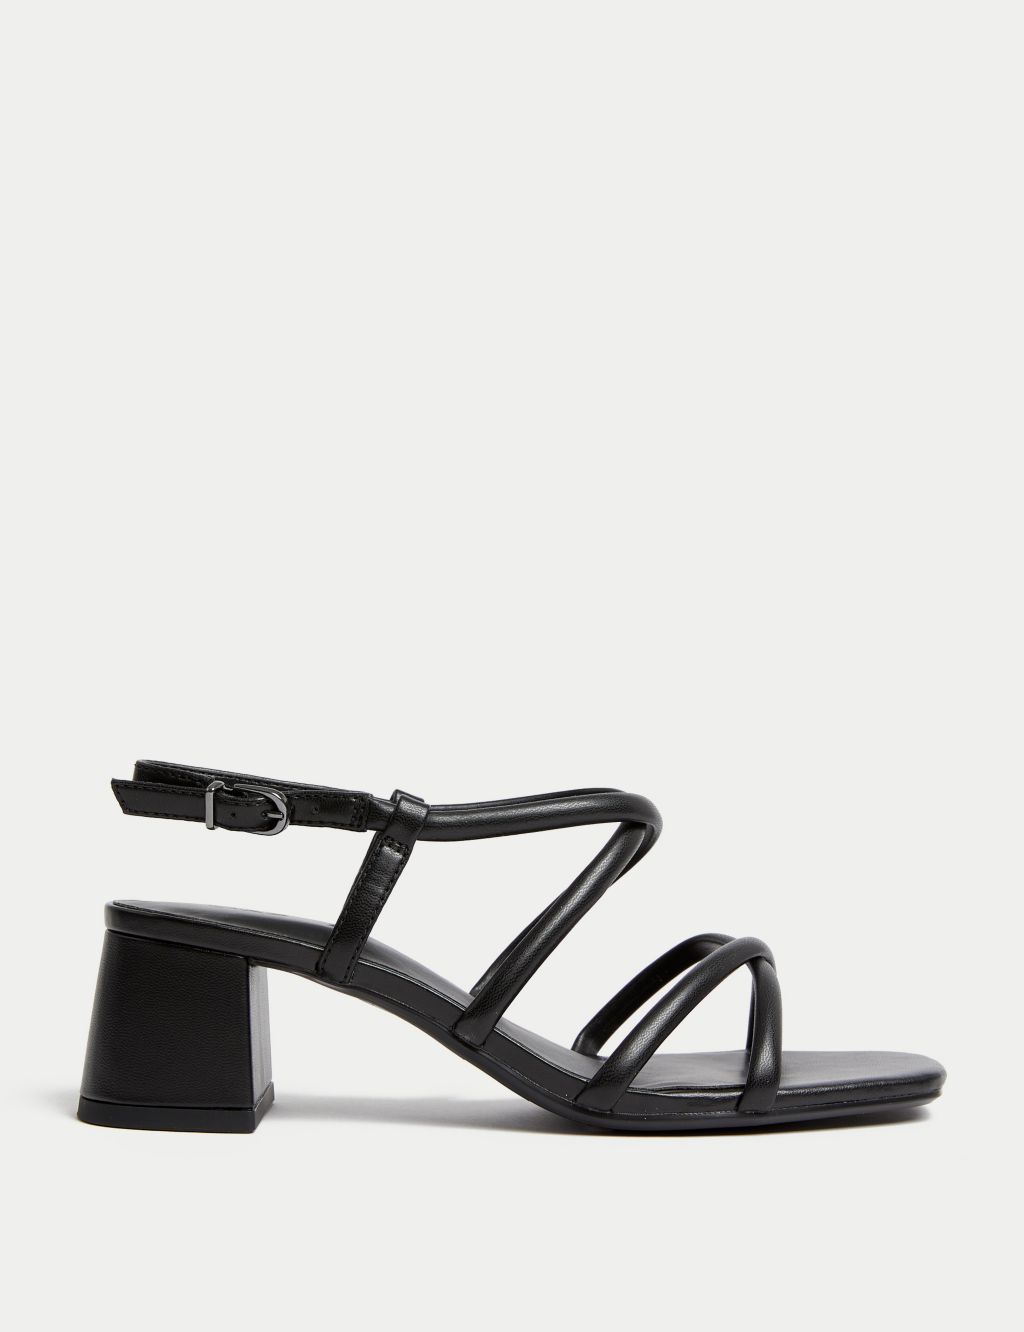 Wide Fit Strappy Block Heel Sandals image 1